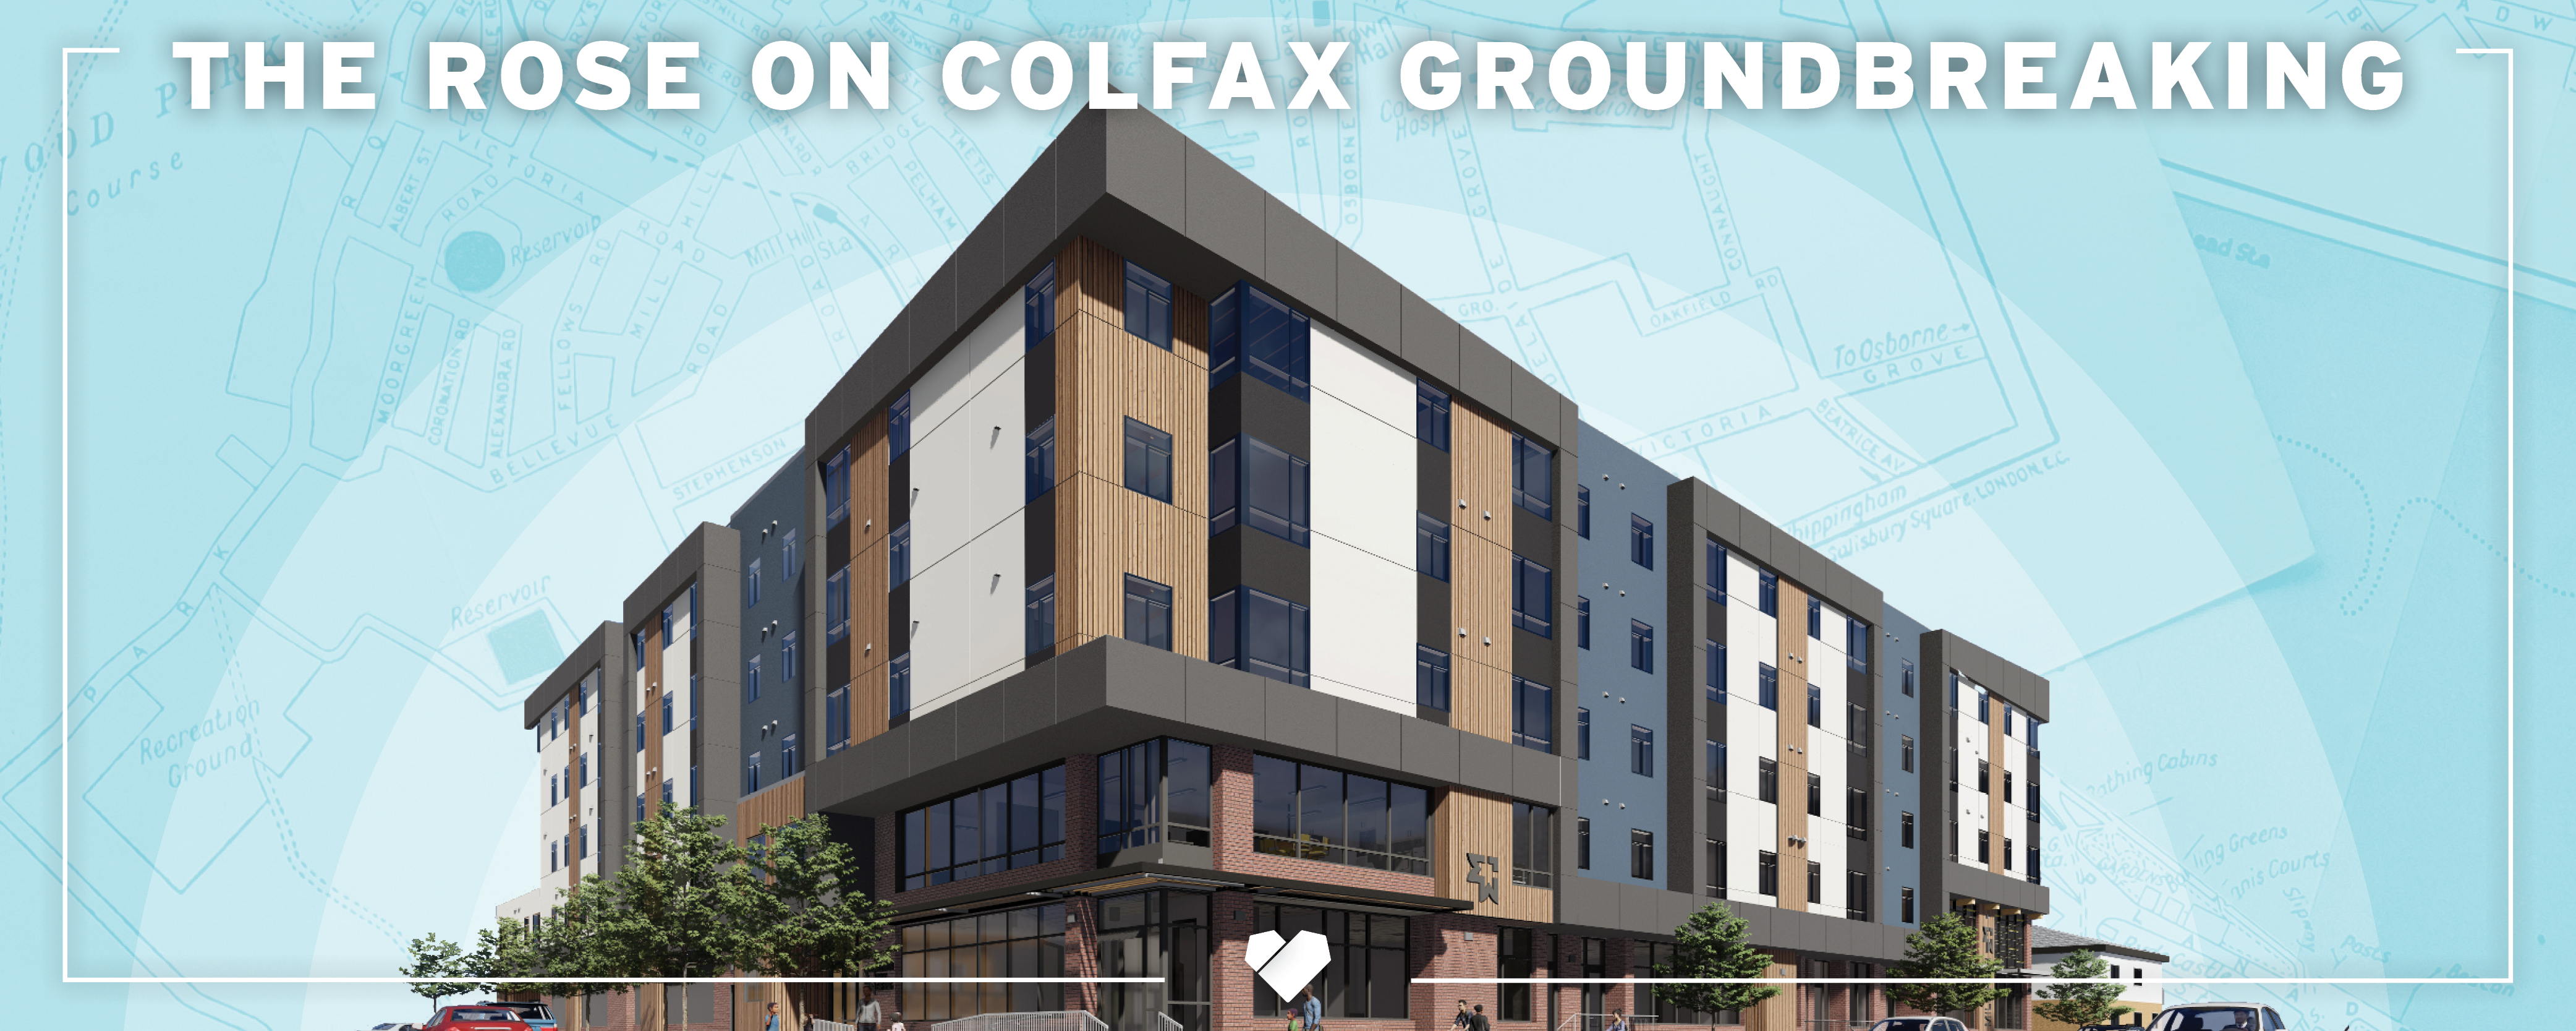 A rendering of the Rose on Colfax building with the caption "The Rose on Colfax Groundbreaking"